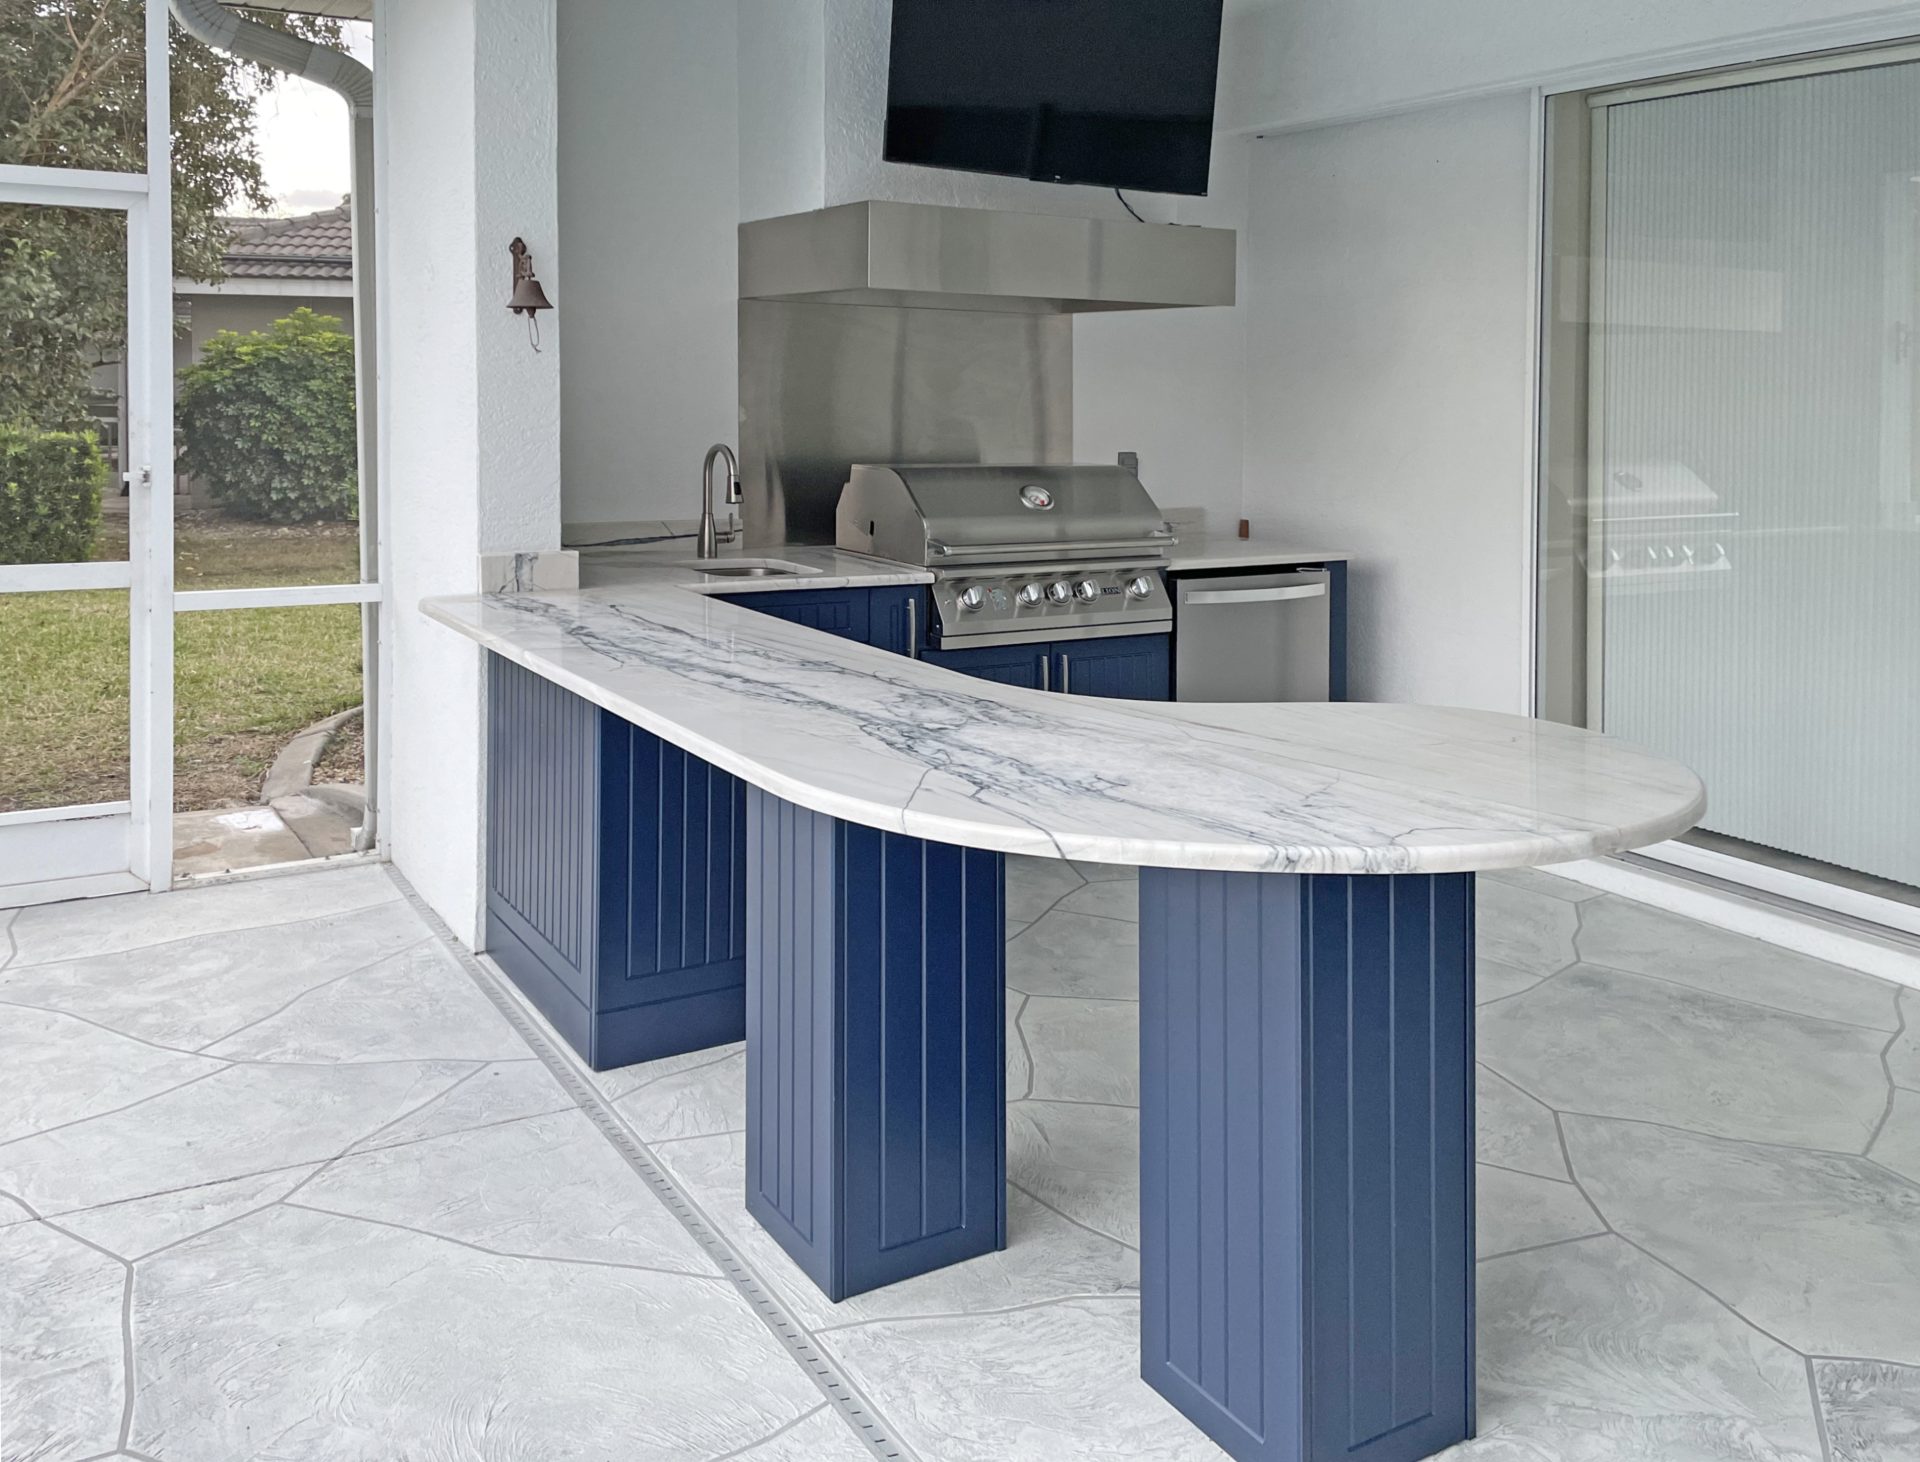 OUTDOOR KITCHEN 20. Custom outdoor kitchen in Lakewood Ranch, FL. Kitchen features blue, v-groove style doors. Appliances include Lion grill, Falmec outdoor hood, stucco hood chase w/TV, Bull stainless front refrigerator and stainless bar pulls.